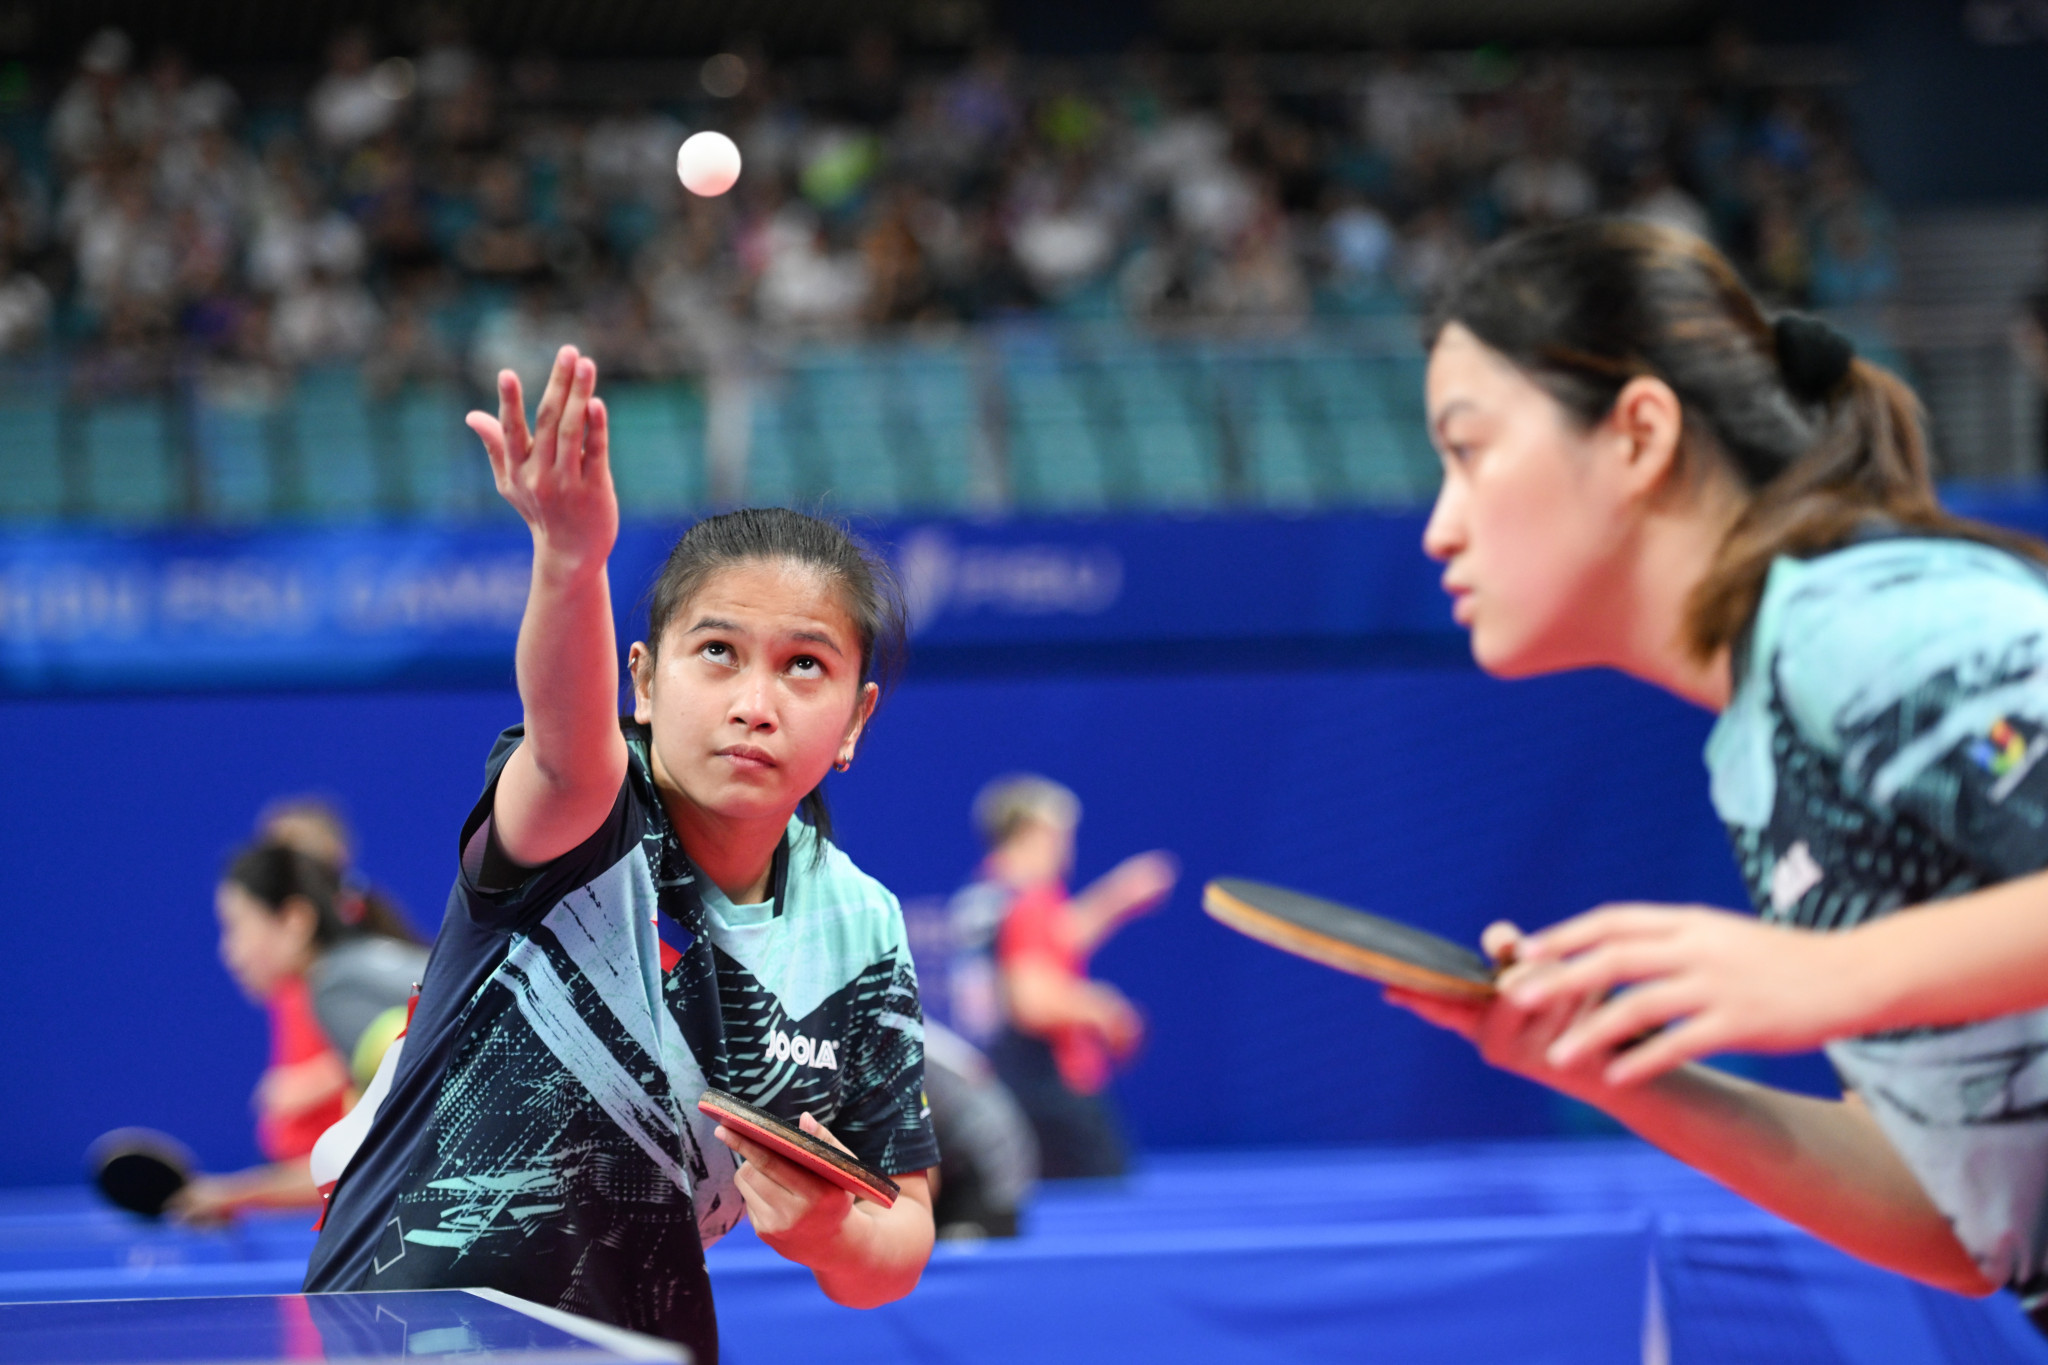 The Philippines are fully focused during their women's doubles table tennis match ©FISU